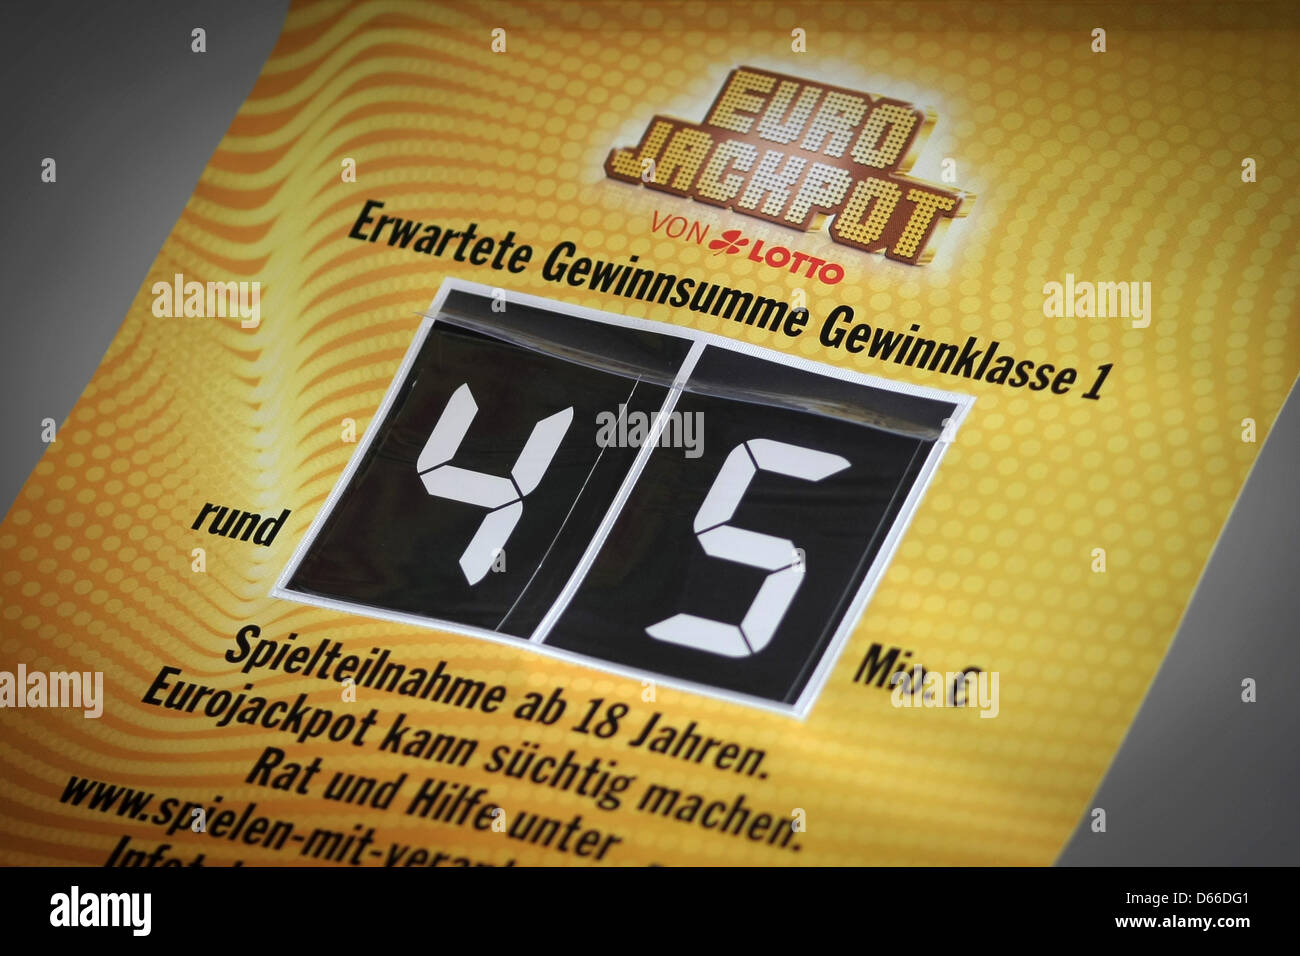 A banner displays the expected Euro Jackpot winning amount of 45 million  euros at a lottery business in Wiesbaden, Germany, 13 April 2013. The  winning numbers were drawn in Helsinki on 12